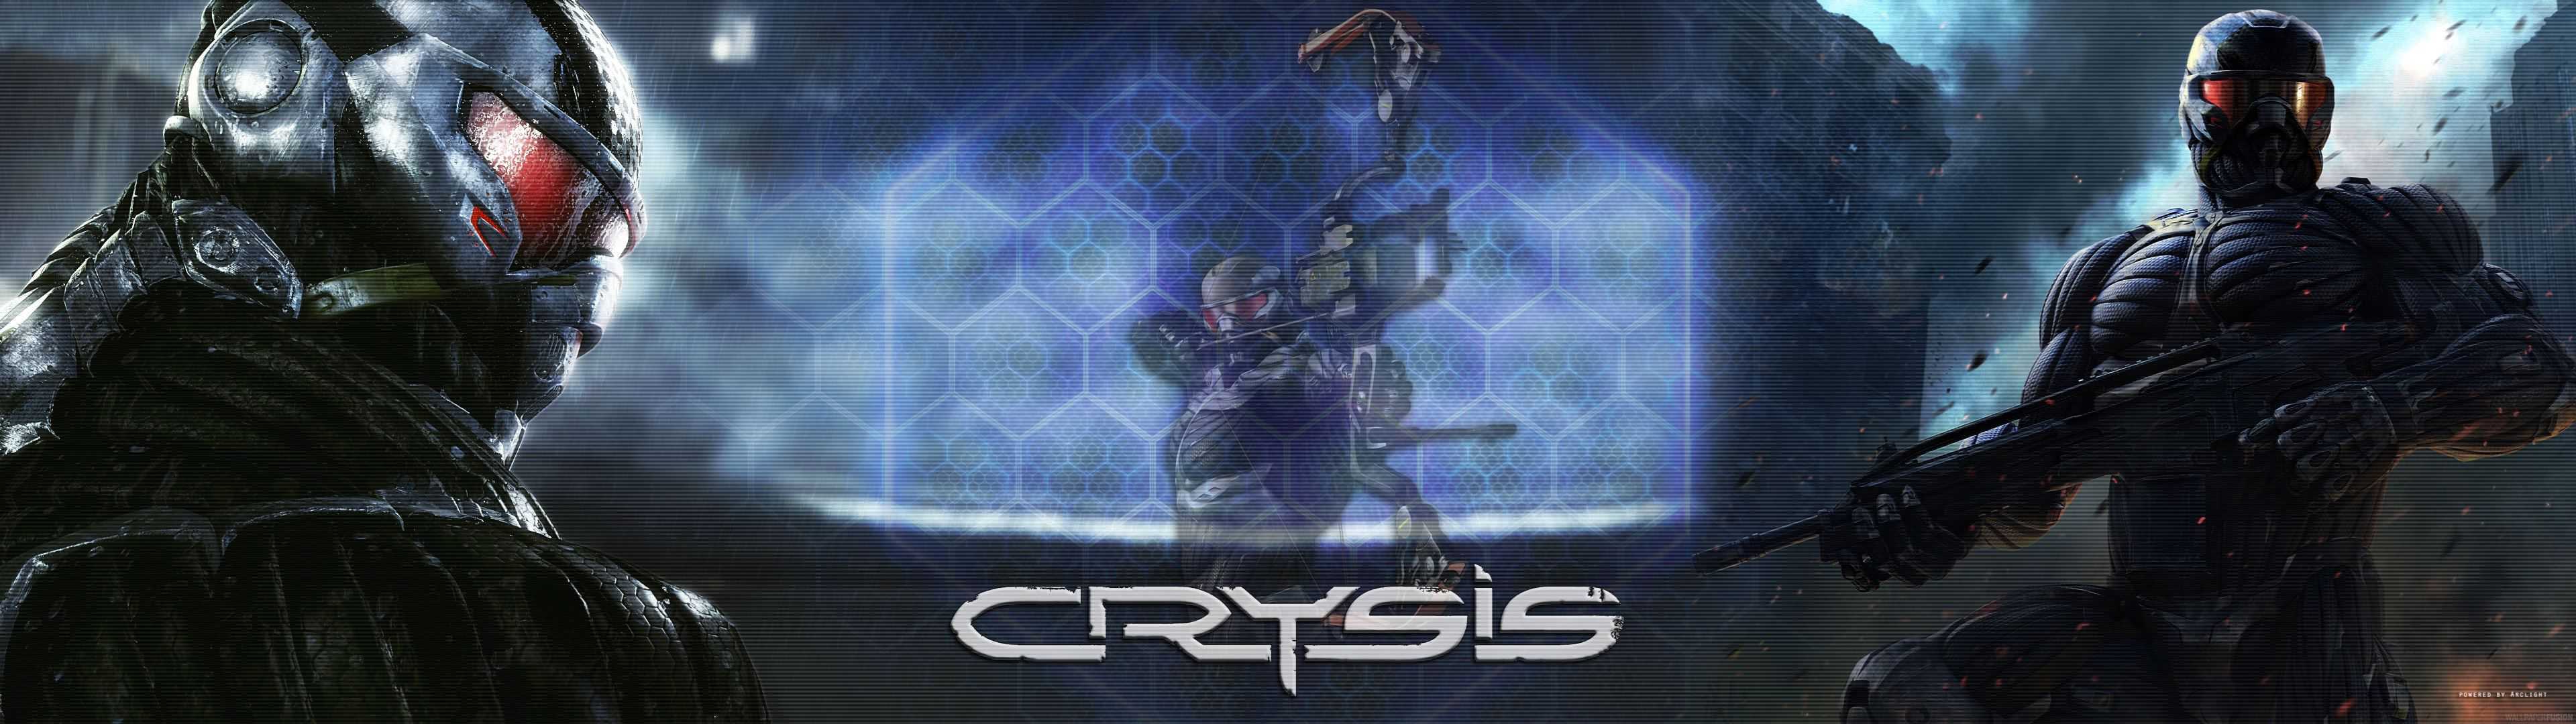 1125x2436 Resolution Crysis Game Iphone XS,Iphone 10,Iphone X Wallpaper -  Wallpapers Den